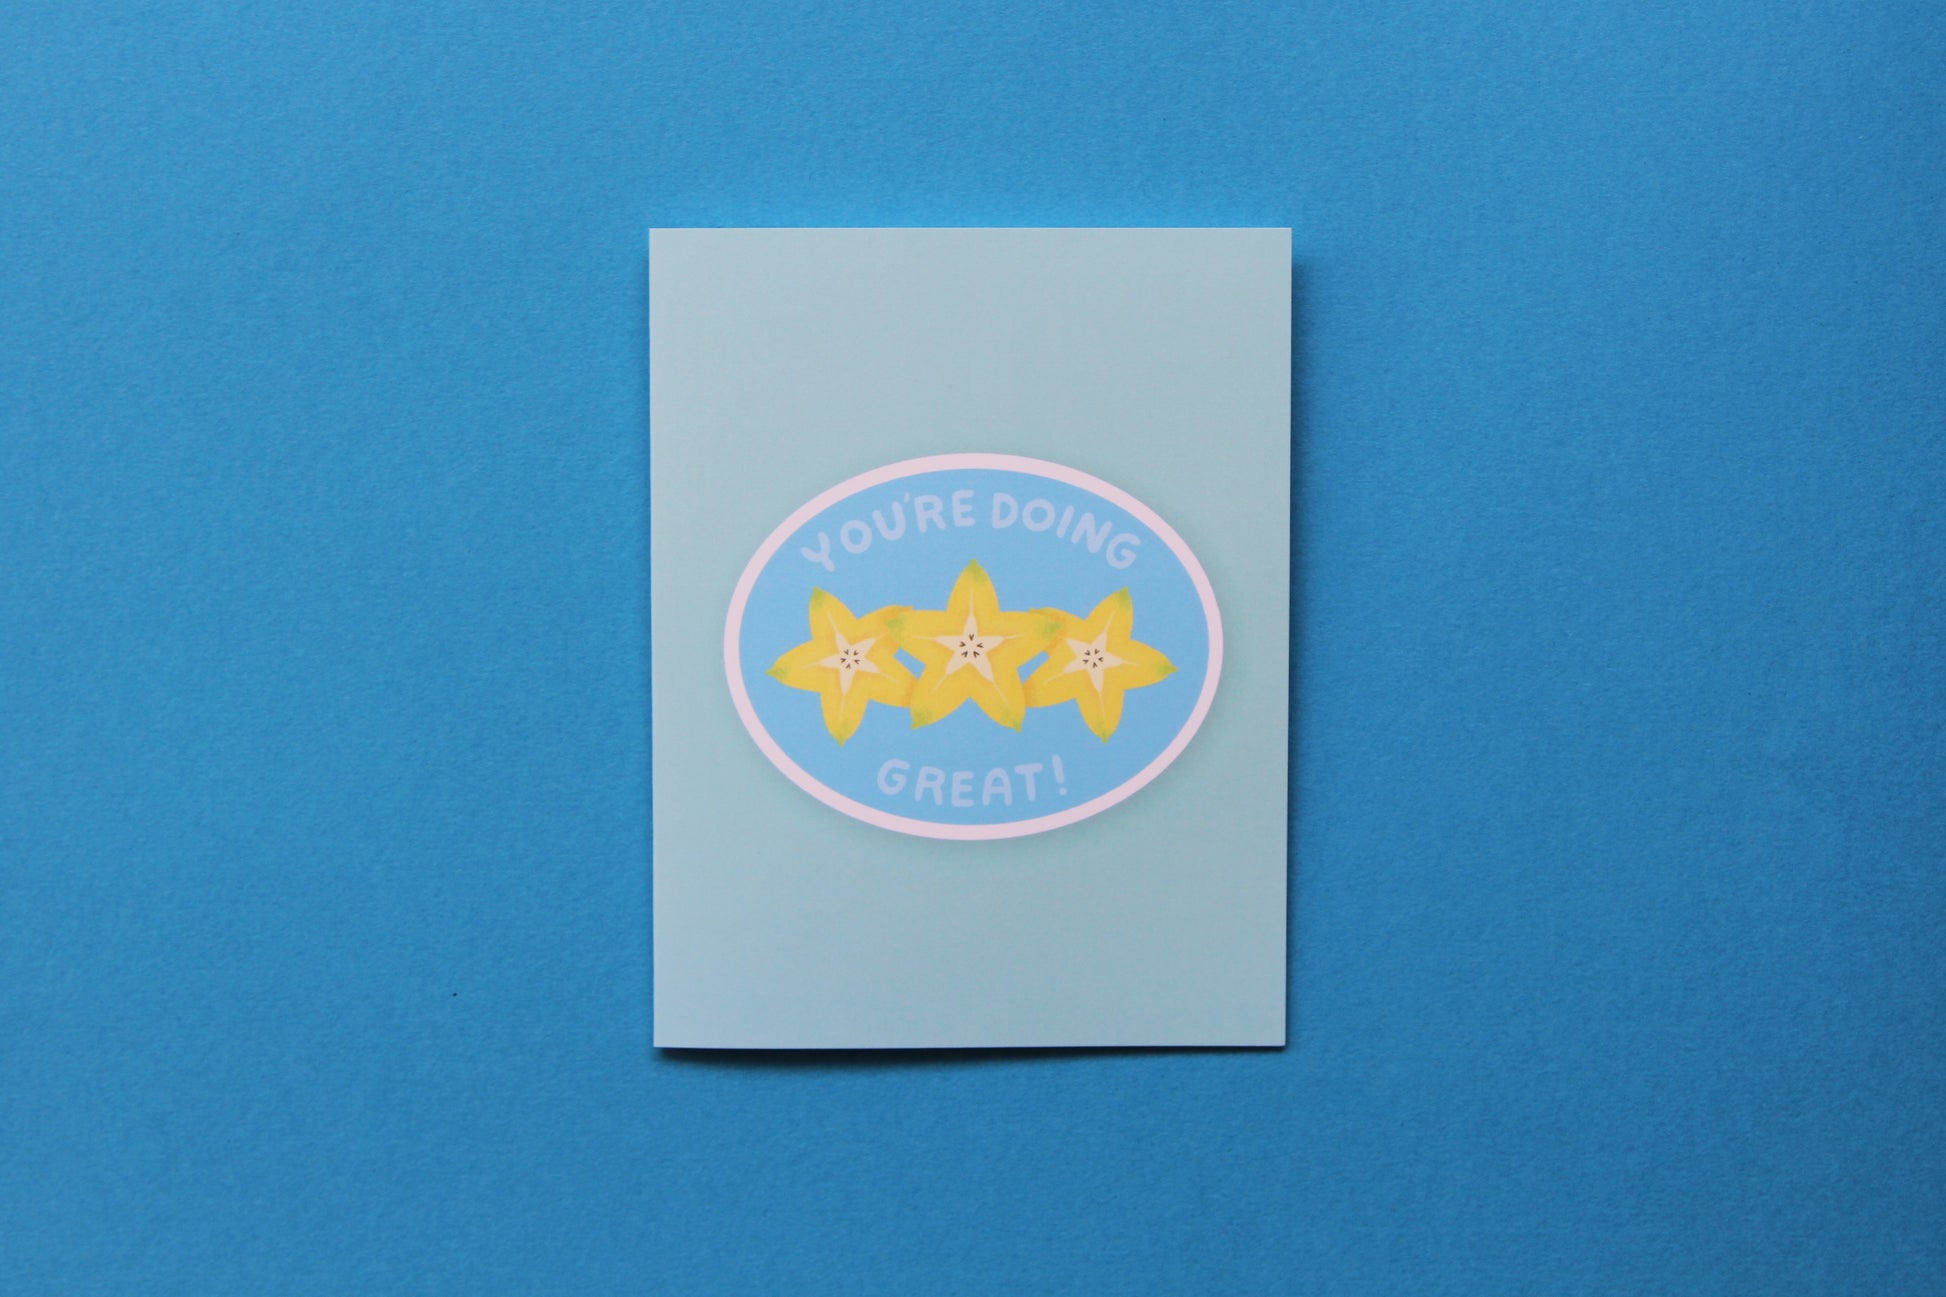 A photo of a blue greeting card with a sliced starfruit that says "You're doing great" on a blue background.